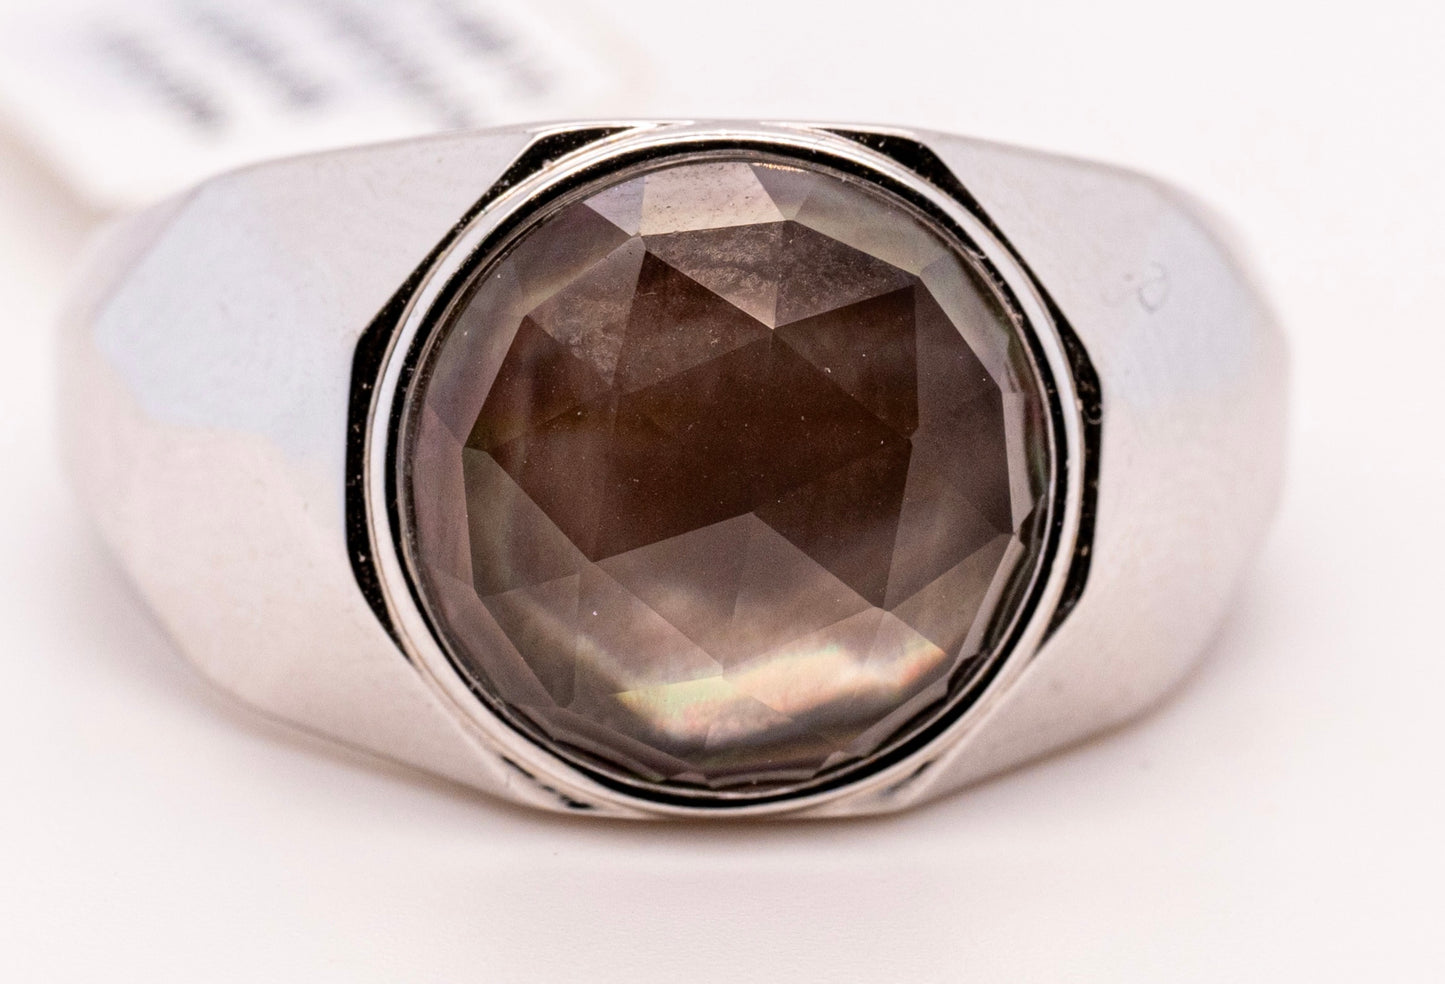 Wide 925 Sterling Silver Signet Ring with Black Mother of Pearl Stone in High Polished Finish